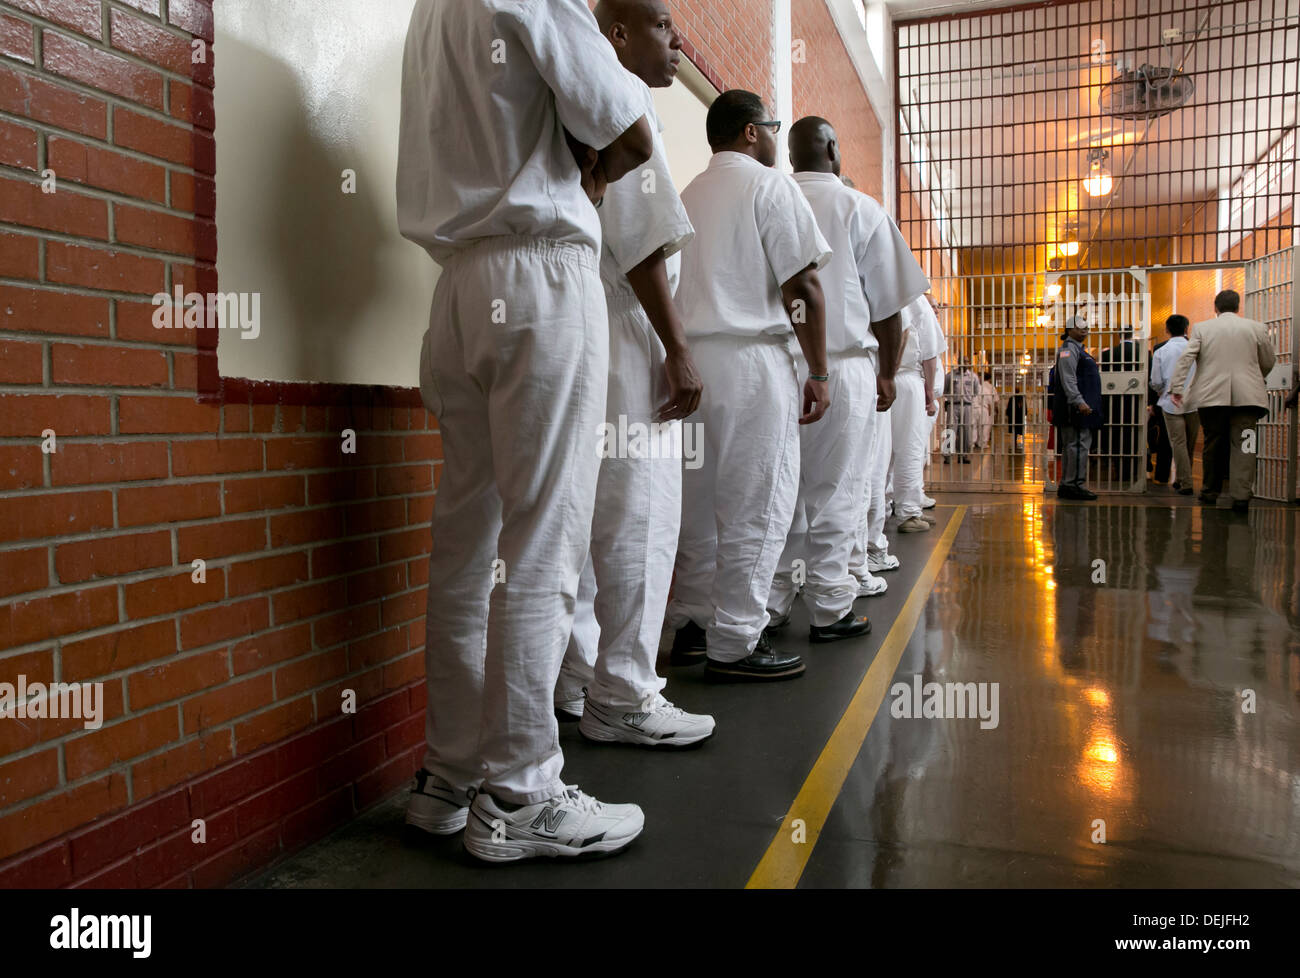 Male inmates at the Darrington Unit near Houston, Texas line up inside prison to attend event Stock Photo